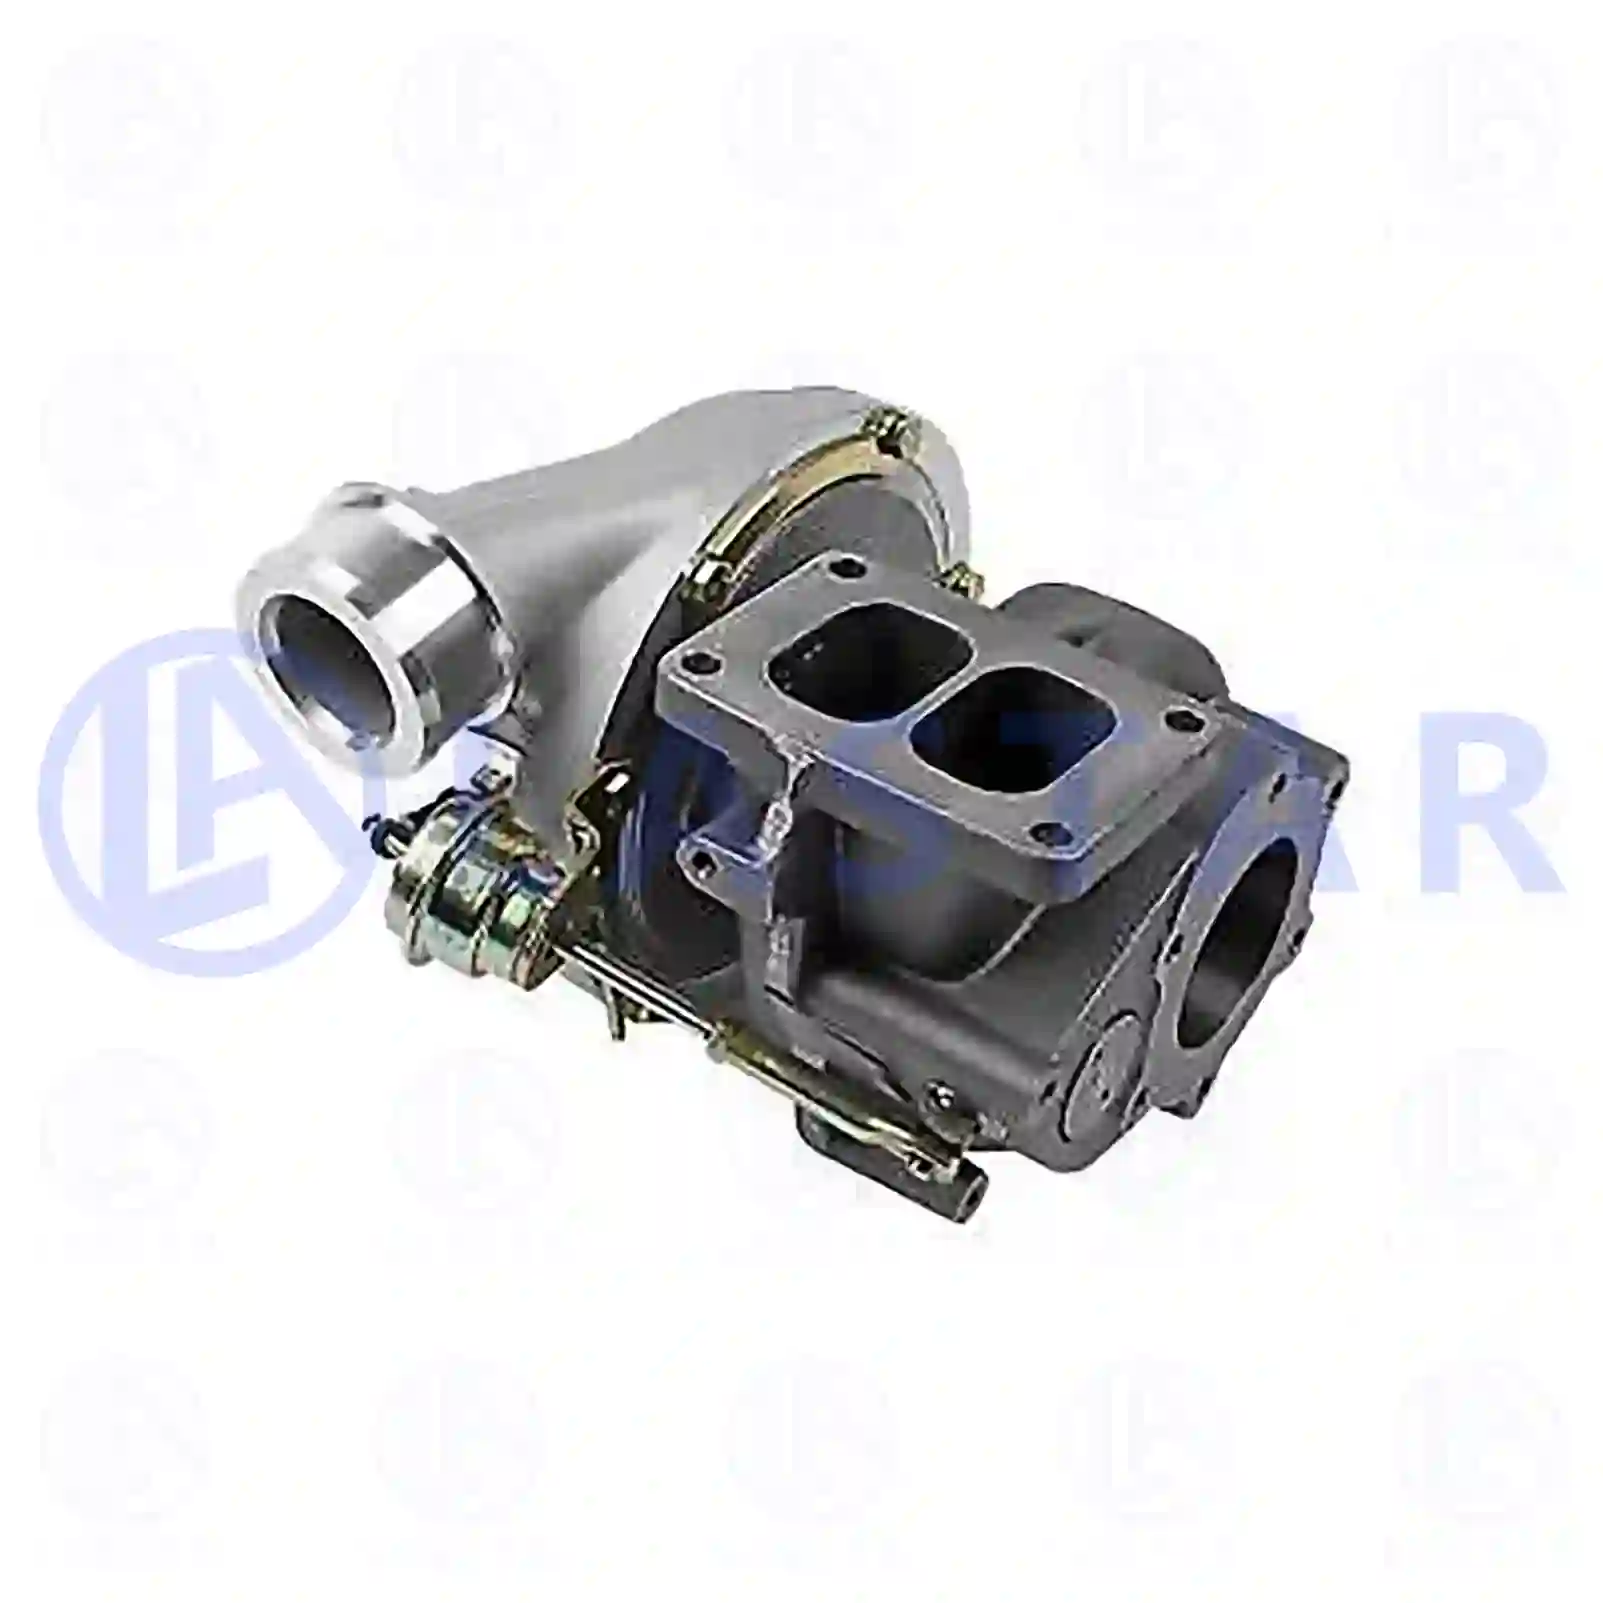 Turbocharger, without gasket kit, 77700414, 1358391, 1358391A, 1358391R, 1366722, 1397101, 1398521, 1398521A, 1398521R, 1448806, 1453029, 1453029A, 1453029R, 1453883, 1609988, 1609988A, 1609988R, 1616433, 1616752, 1642314, 1642314A, 1642314R, 1642316, 1642316A, 1642316R, 1779164, 1779164A, 1779164R ||  77700414 Lastar Spare Part | Truck Spare Parts, Auotomotive Spare Parts Turbocharger, without gasket kit, 77700414, 1358391, 1358391A, 1358391R, 1366722, 1397101, 1398521, 1398521A, 1398521R, 1448806, 1453029, 1453029A, 1453029R, 1453883, 1609988, 1609988A, 1609988R, 1616433, 1616752, 1642314, 1642314A, 1642314R, 1642316, 1642316A, 1642316R, 1779164, 1779164A, 1779164R ||  77700414 Lastar Spare Part | Truck Spare Parts, Auotomotive Spare Parts